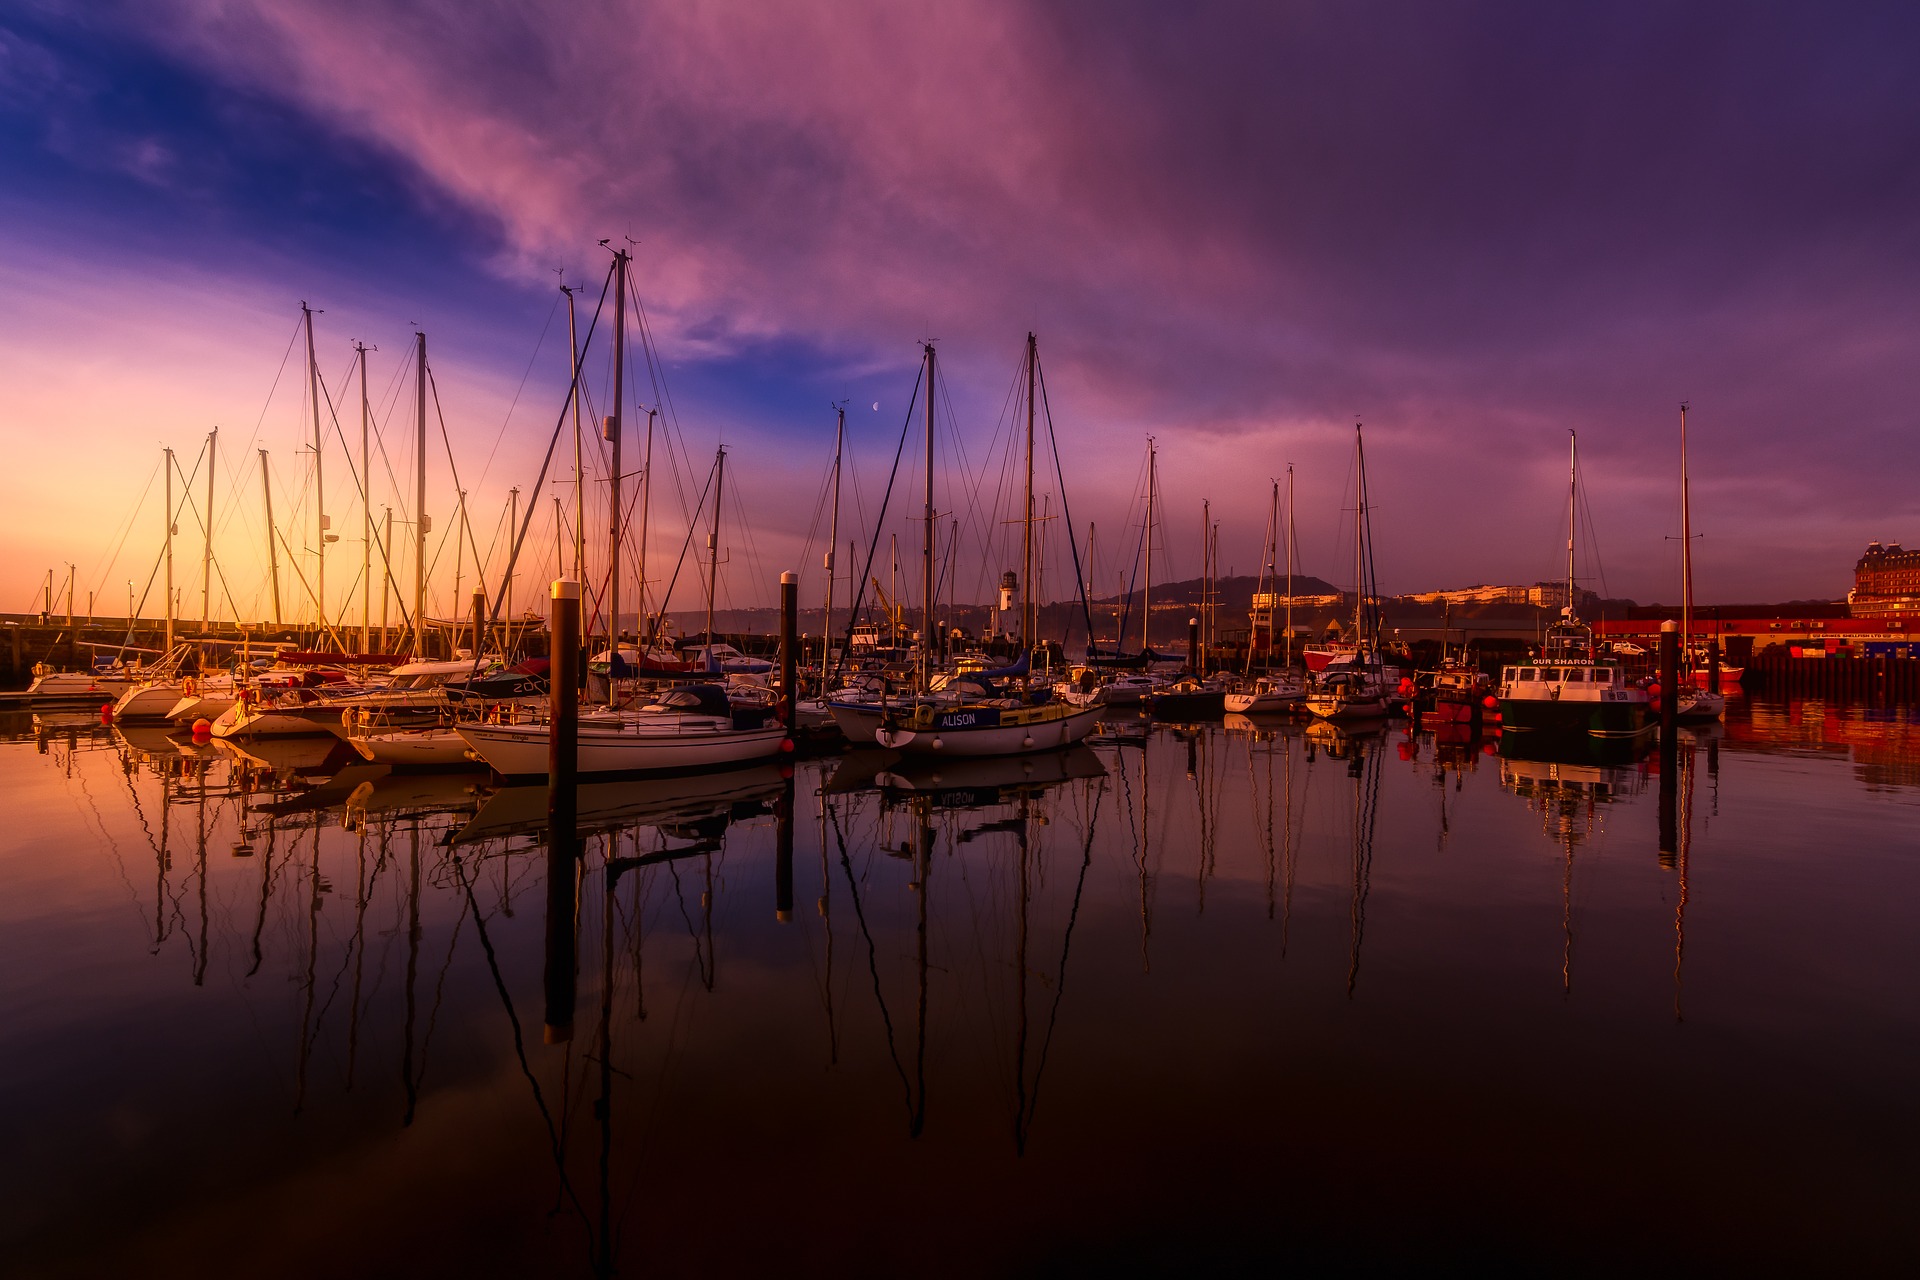 a group of sailboats in a harbor at sunset